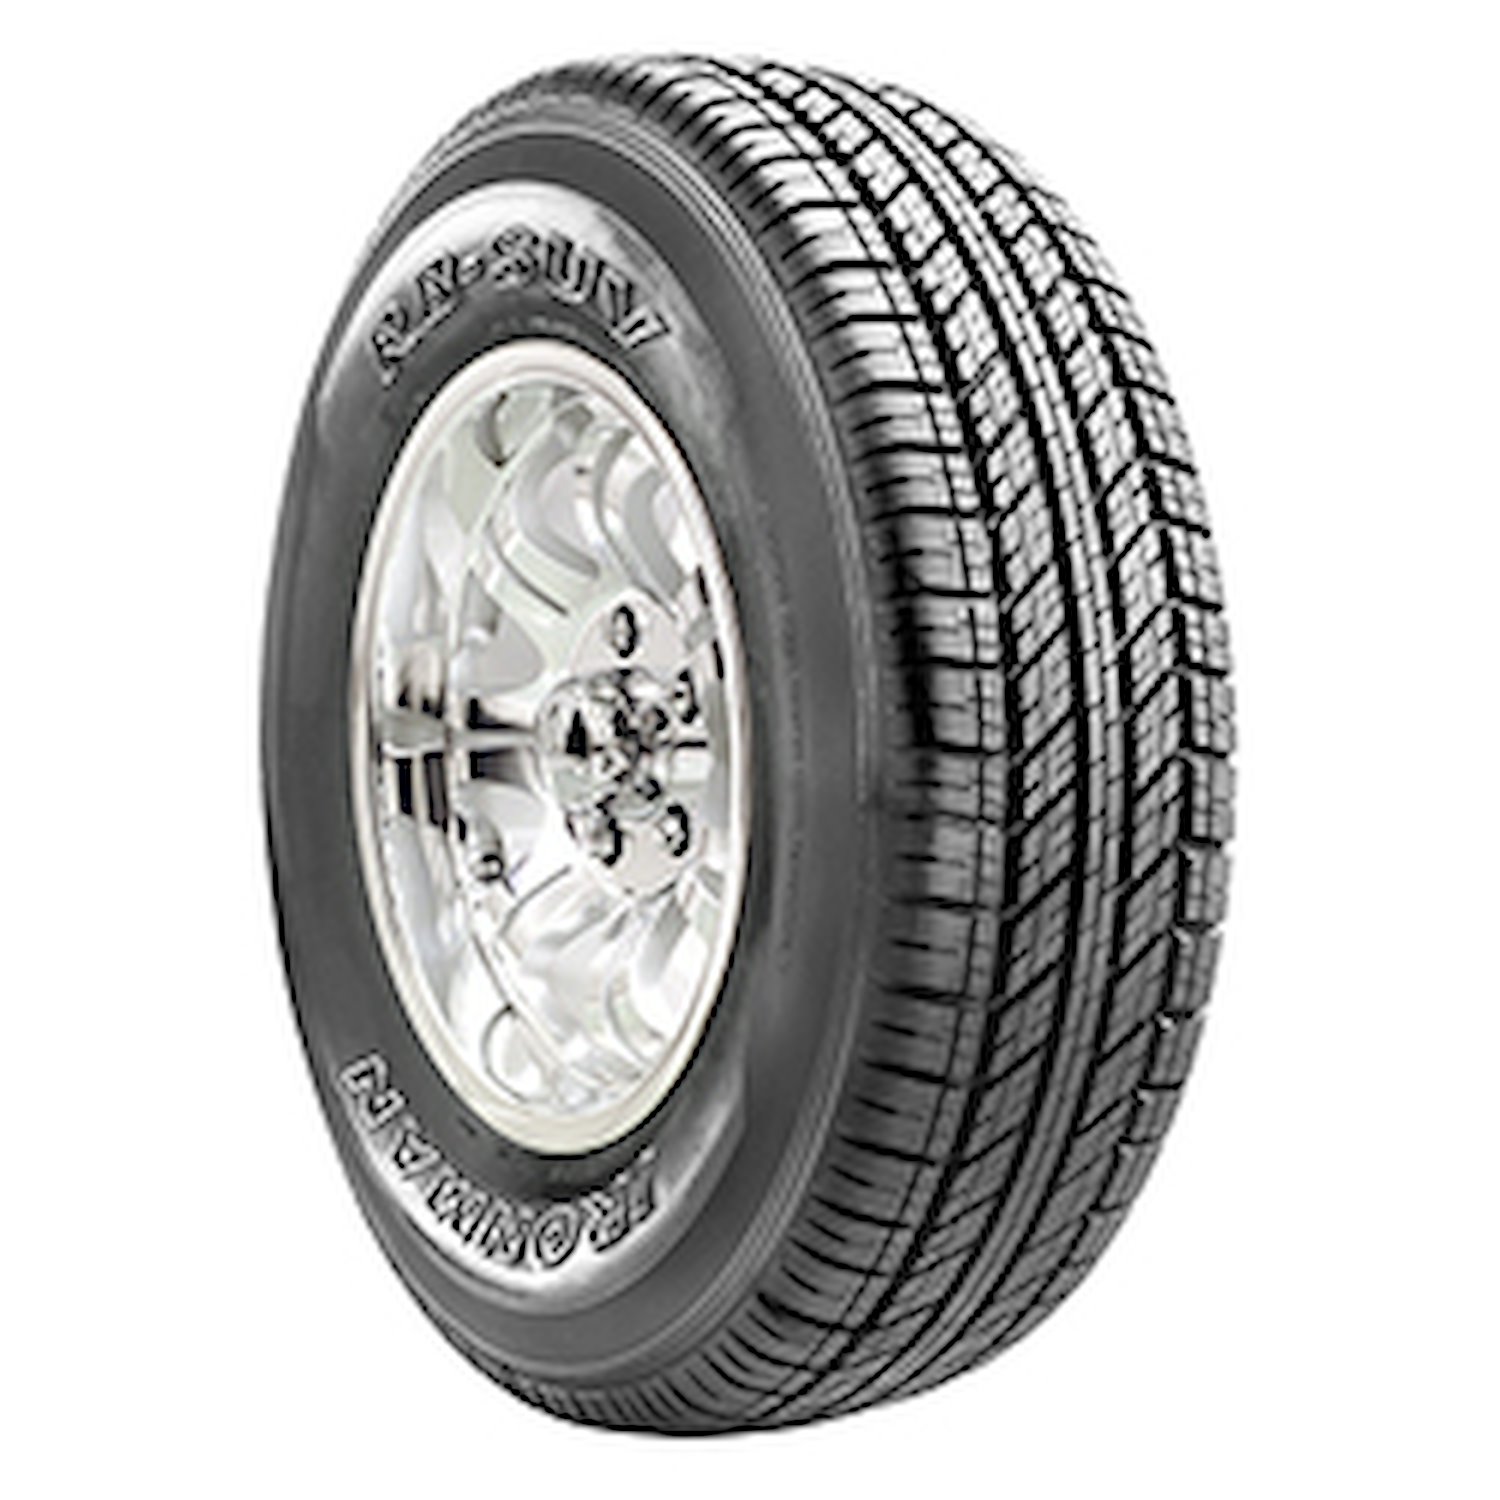 RB SUV Tire, 255/65R18 111T